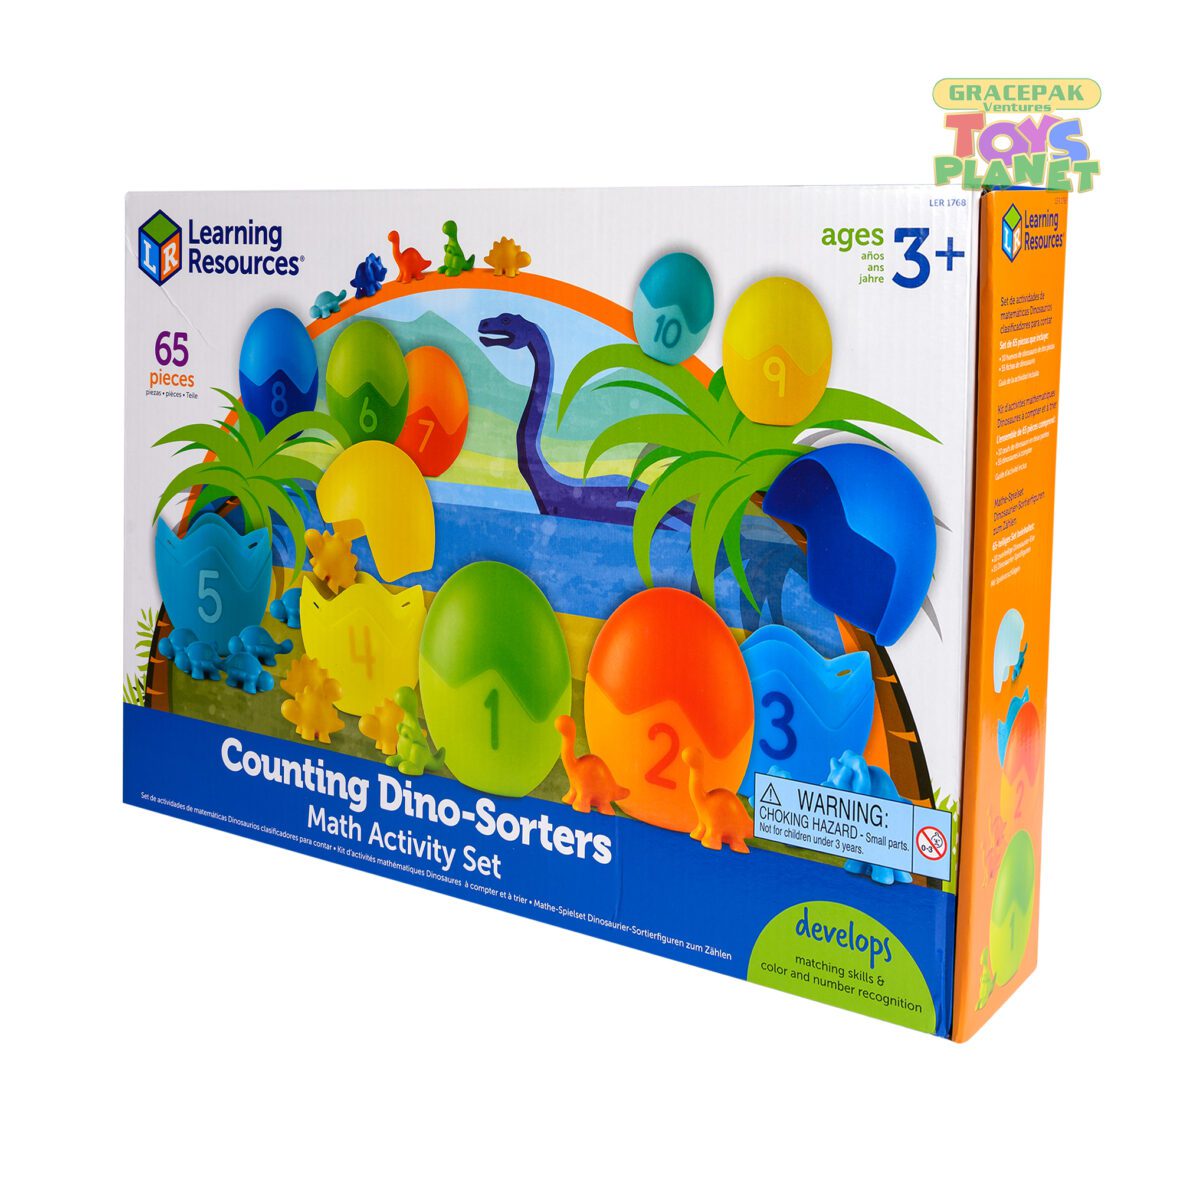 Learning Resources_Counting Dino-Sorters Maths Activity Set_2